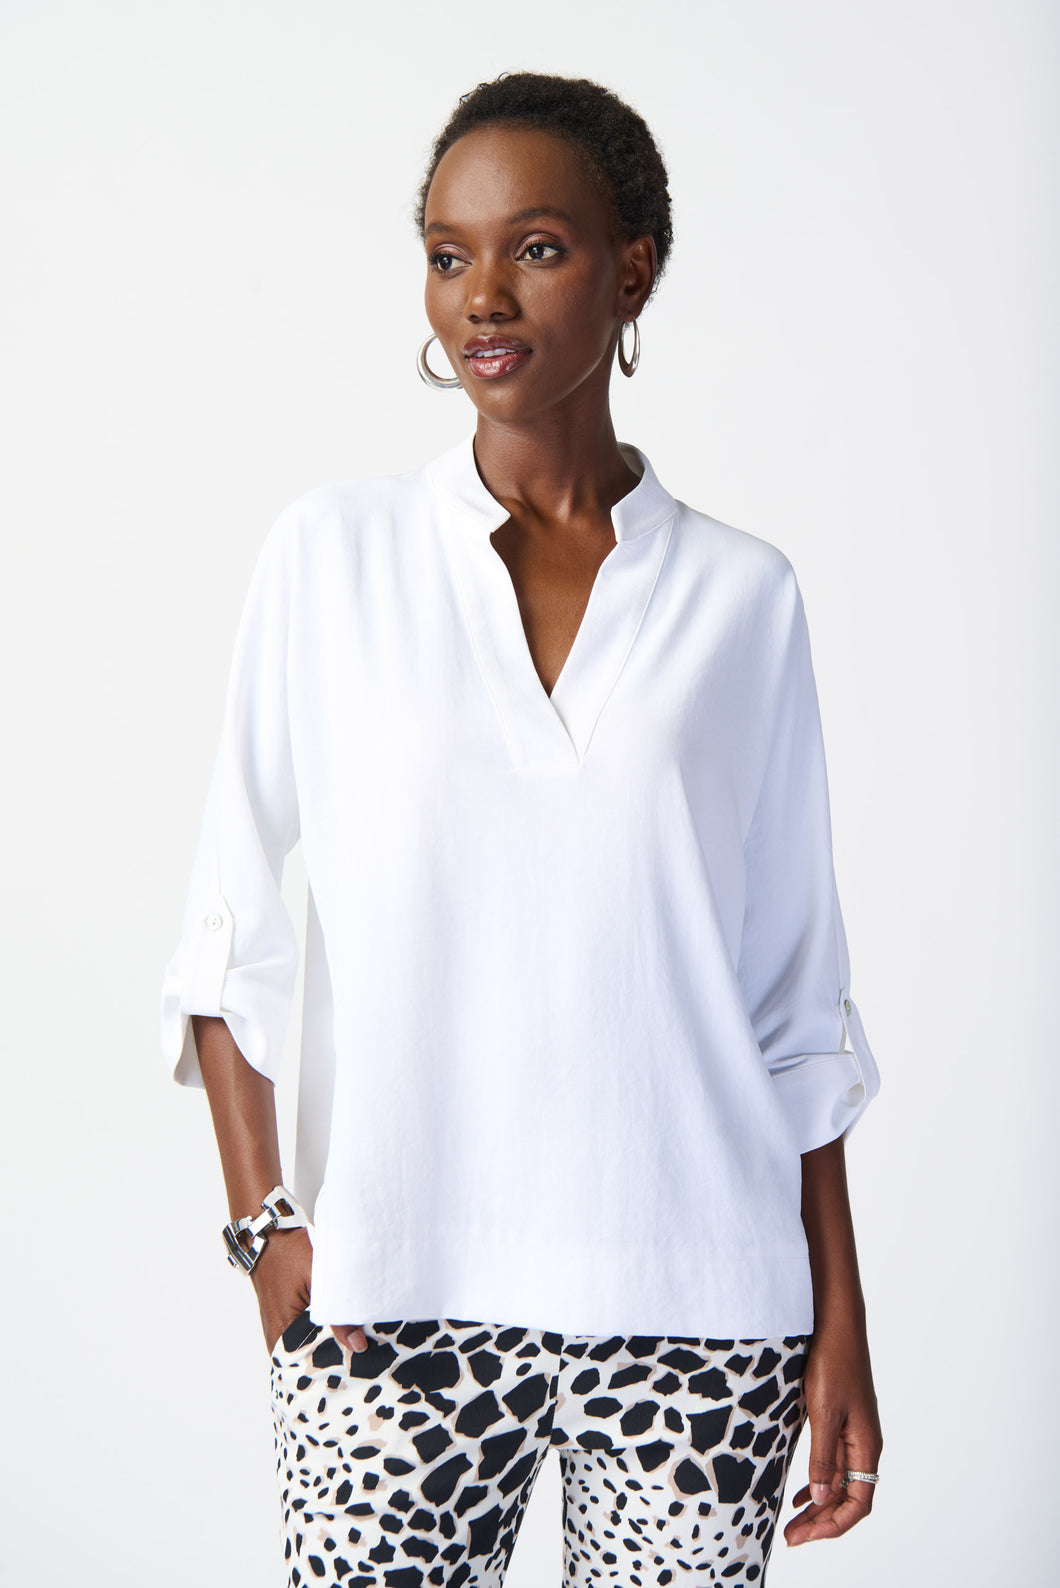 Woven Top with Dolman Sleeves